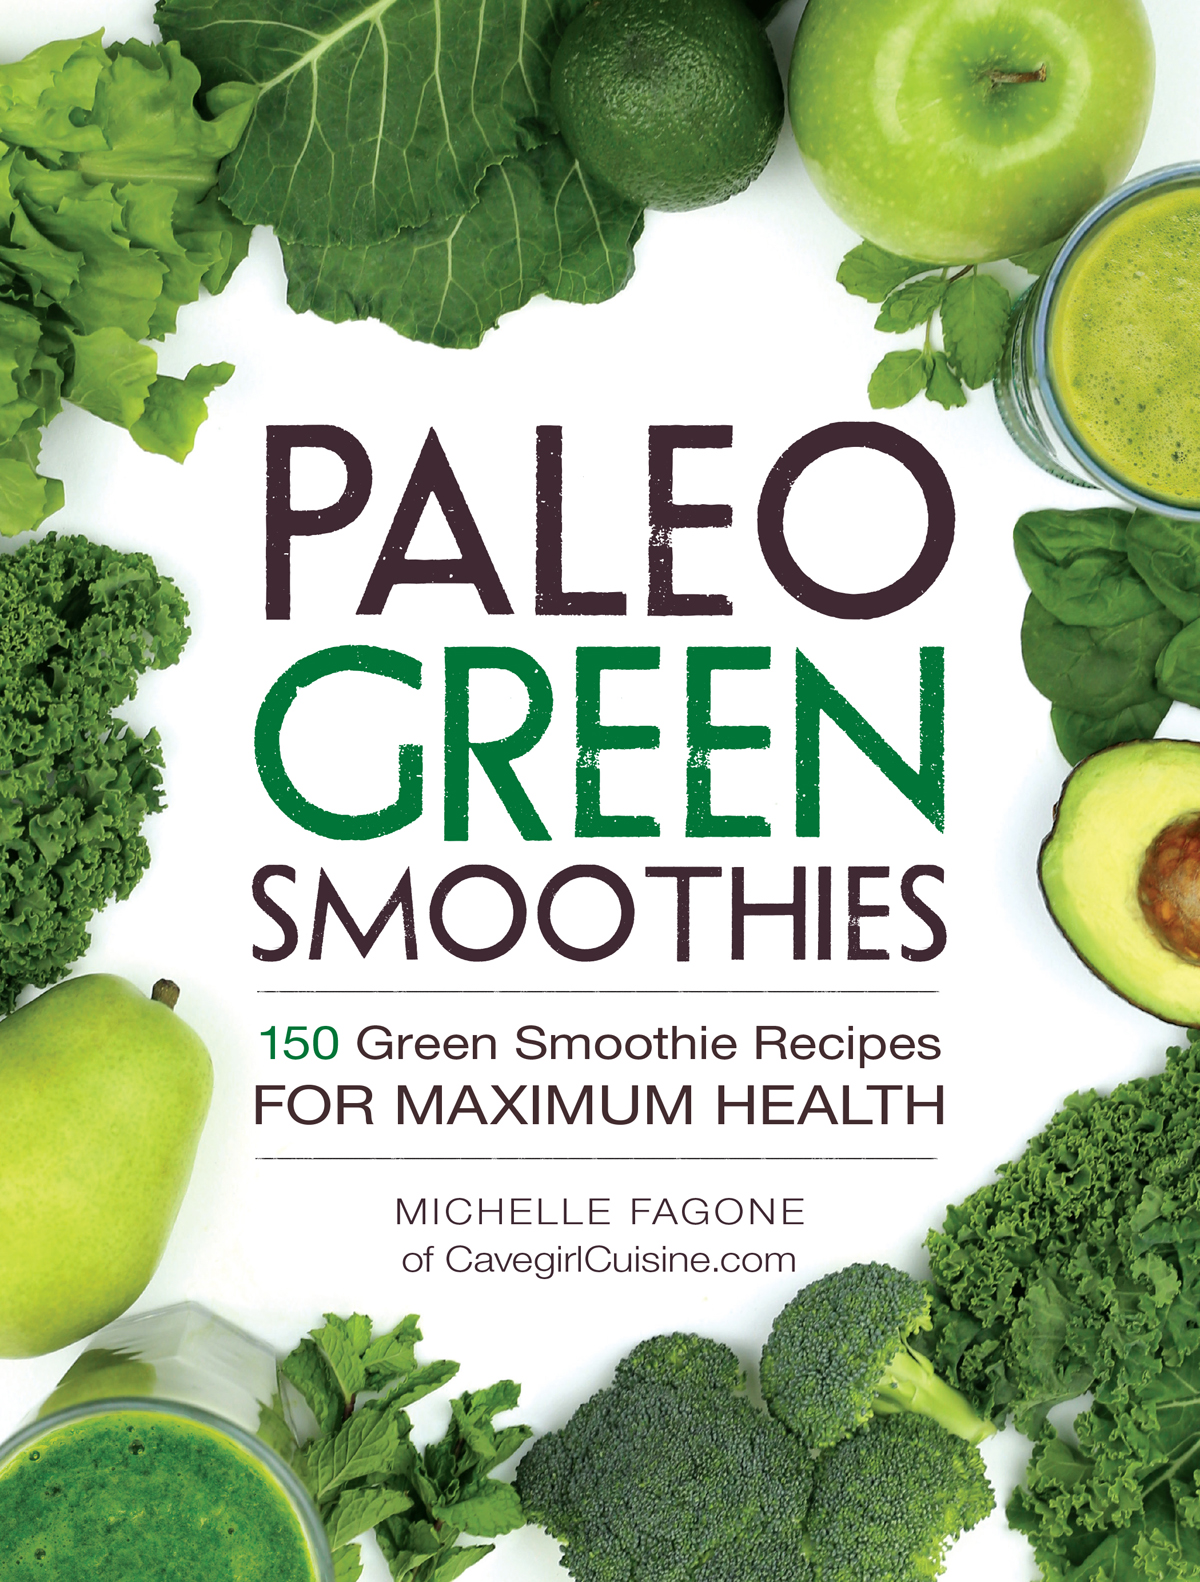 Paleo green smoothies 150 green smoothie recipes for maximum health - image 1